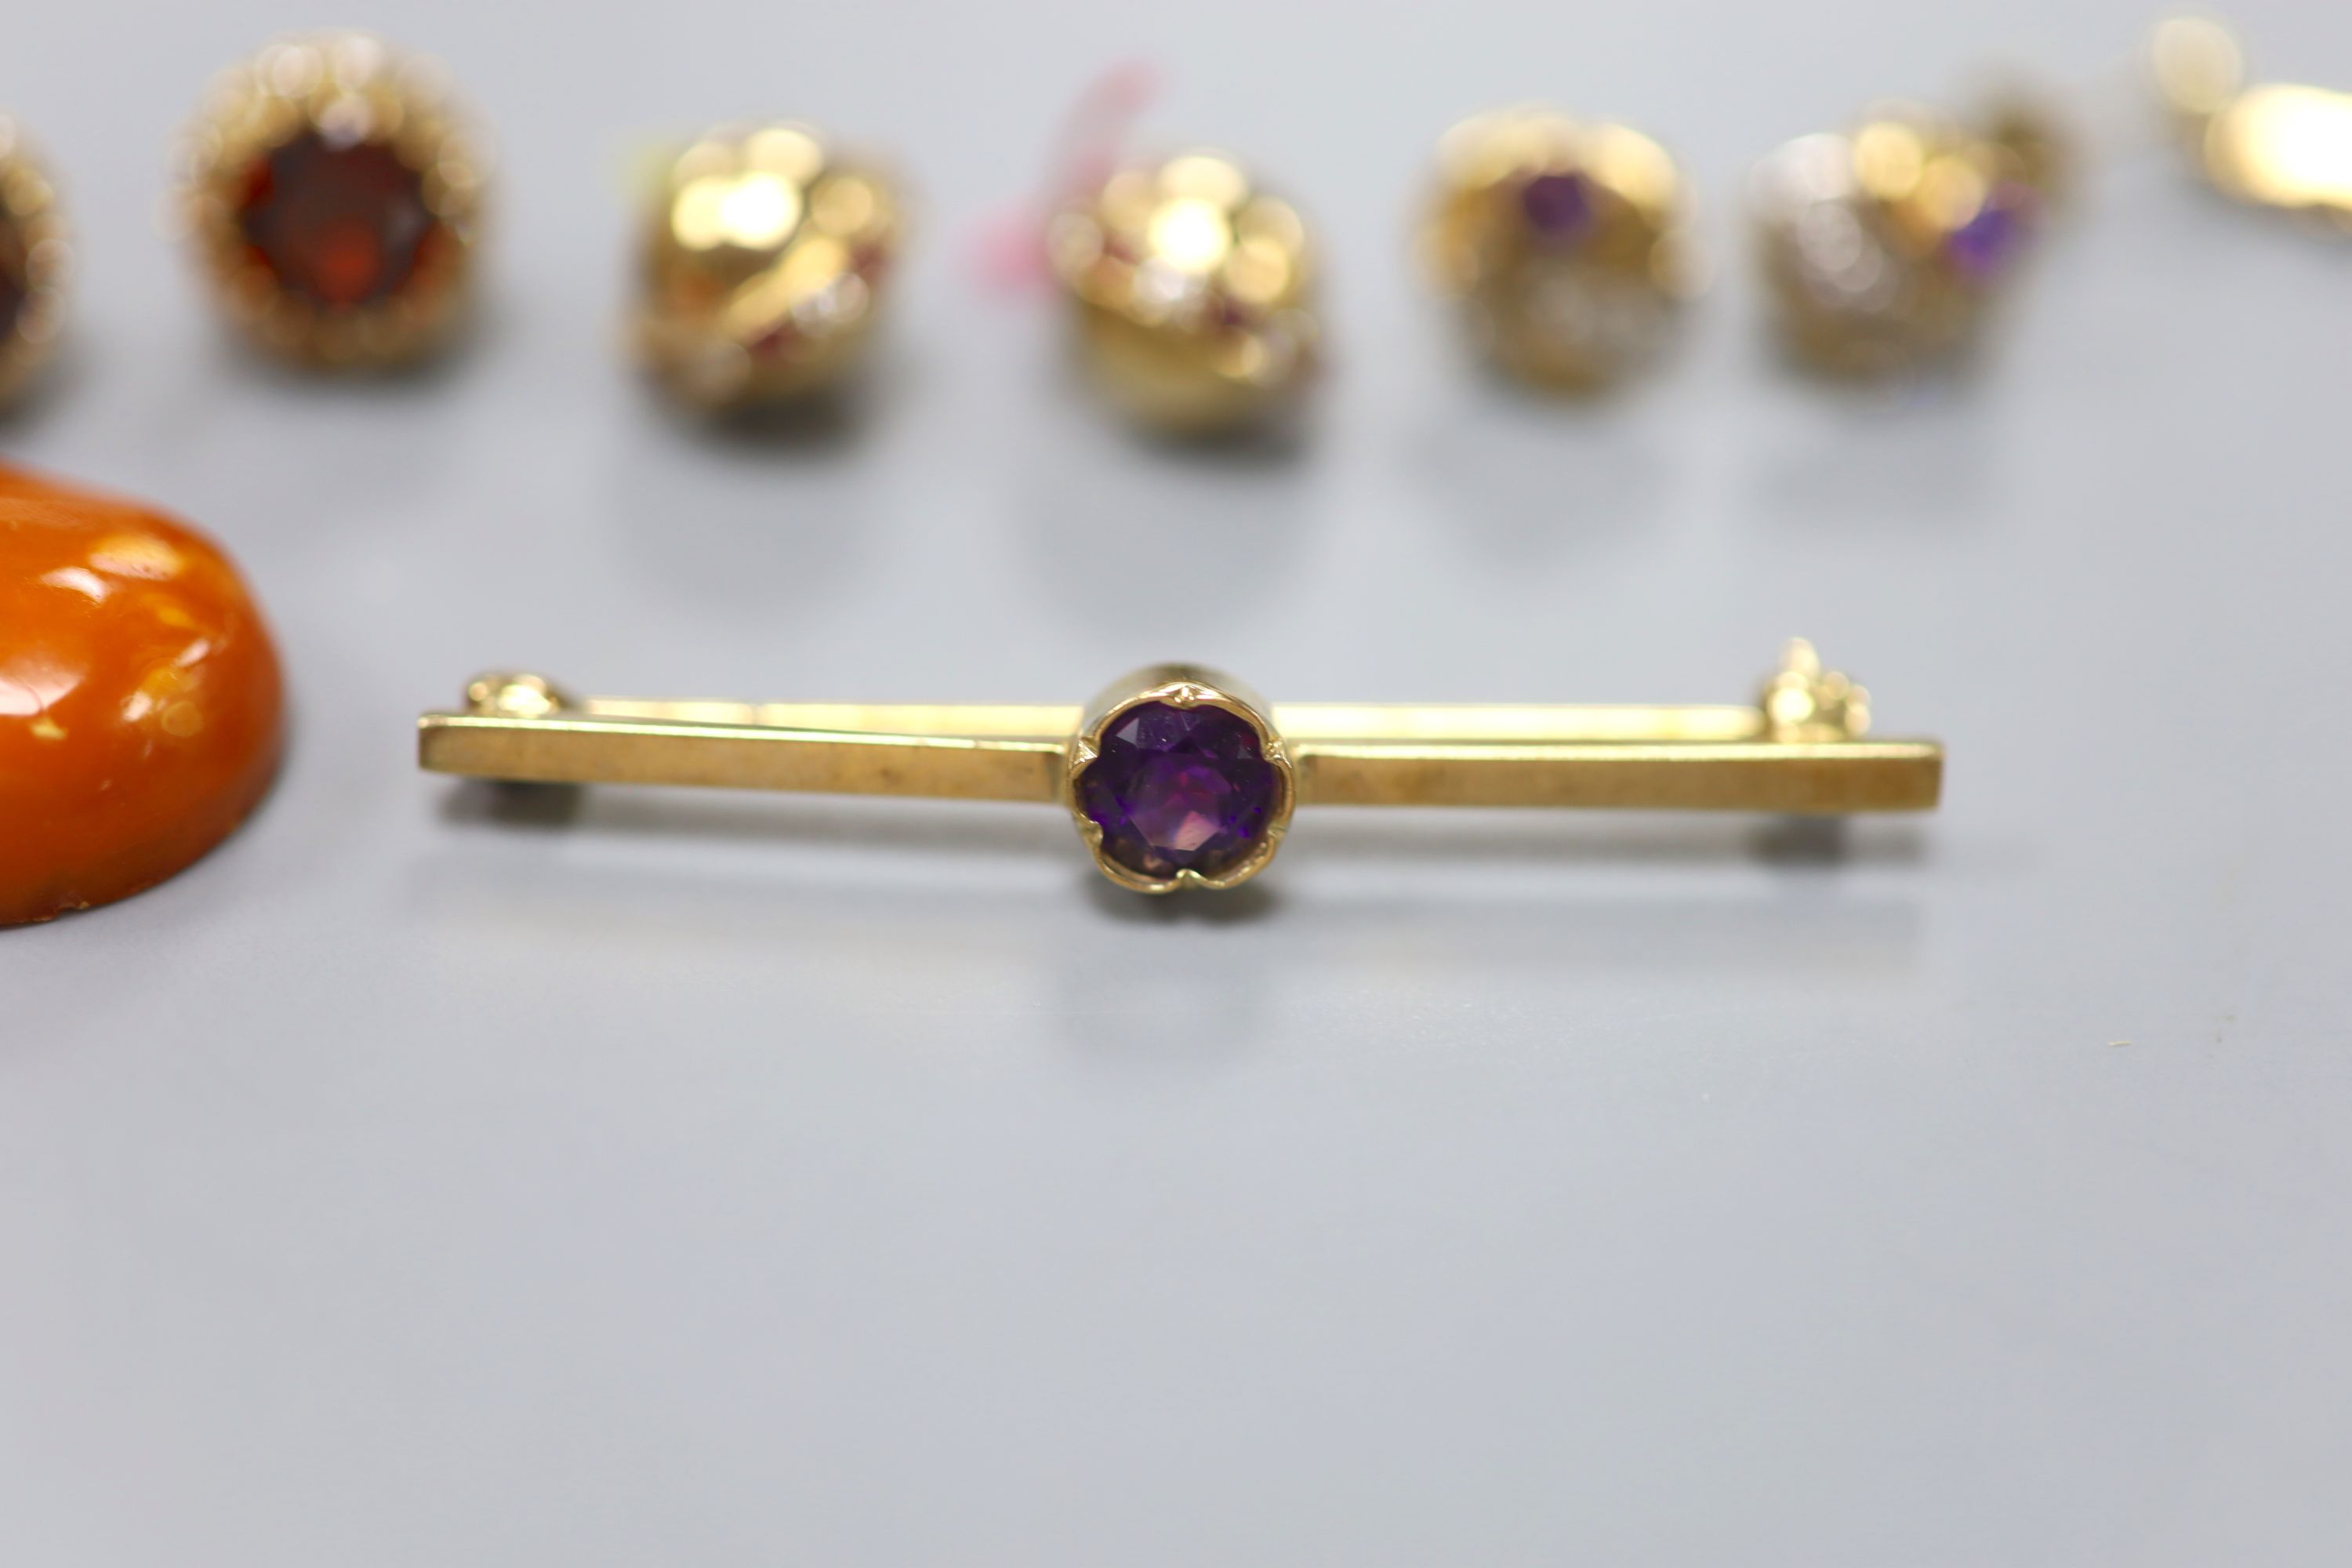 Four assorted modern pairs of 9ct gold & gem set ear studs, a 9ct and amethyst bar brooch, amber pendant and rolled gold cameo brooch